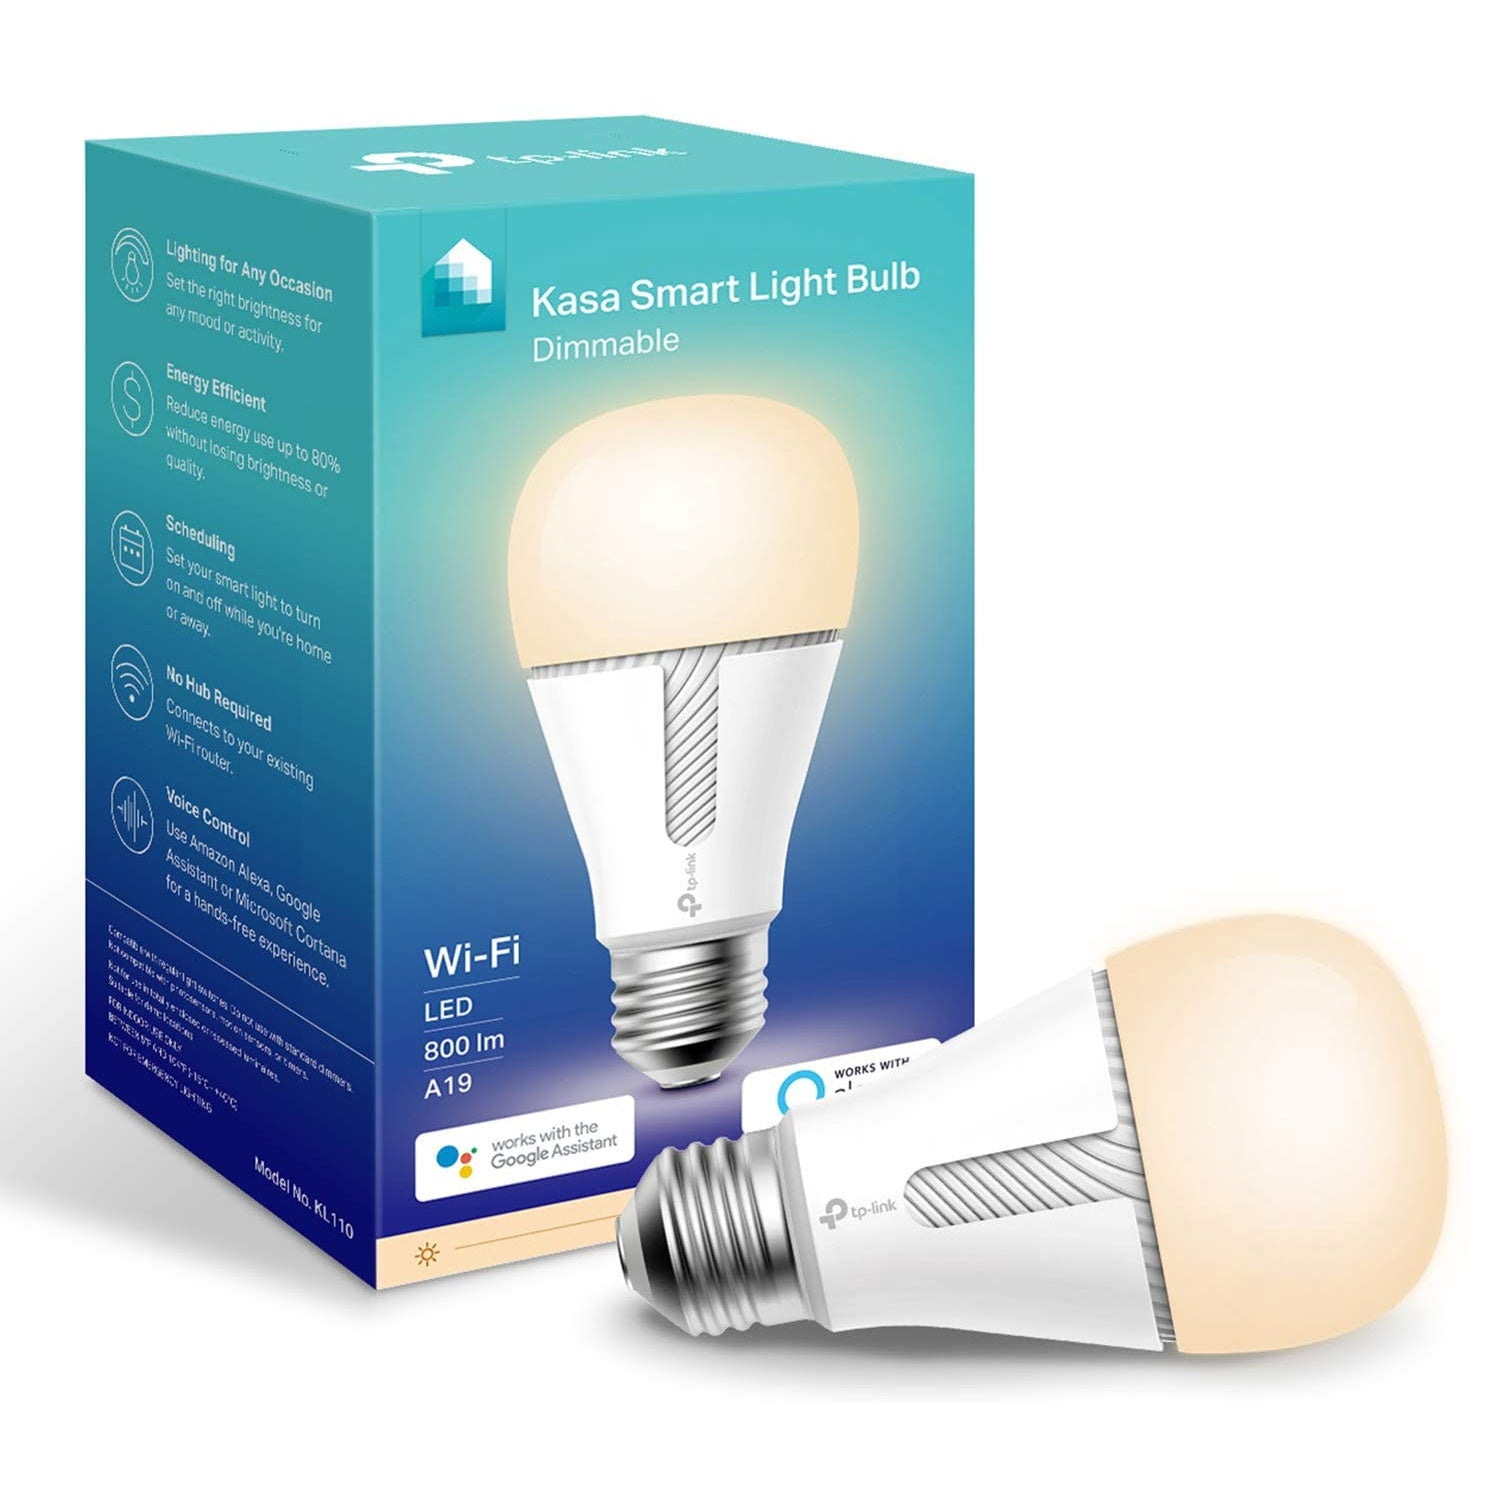 a tp link kasa kl110 smart light bulb with its packaging